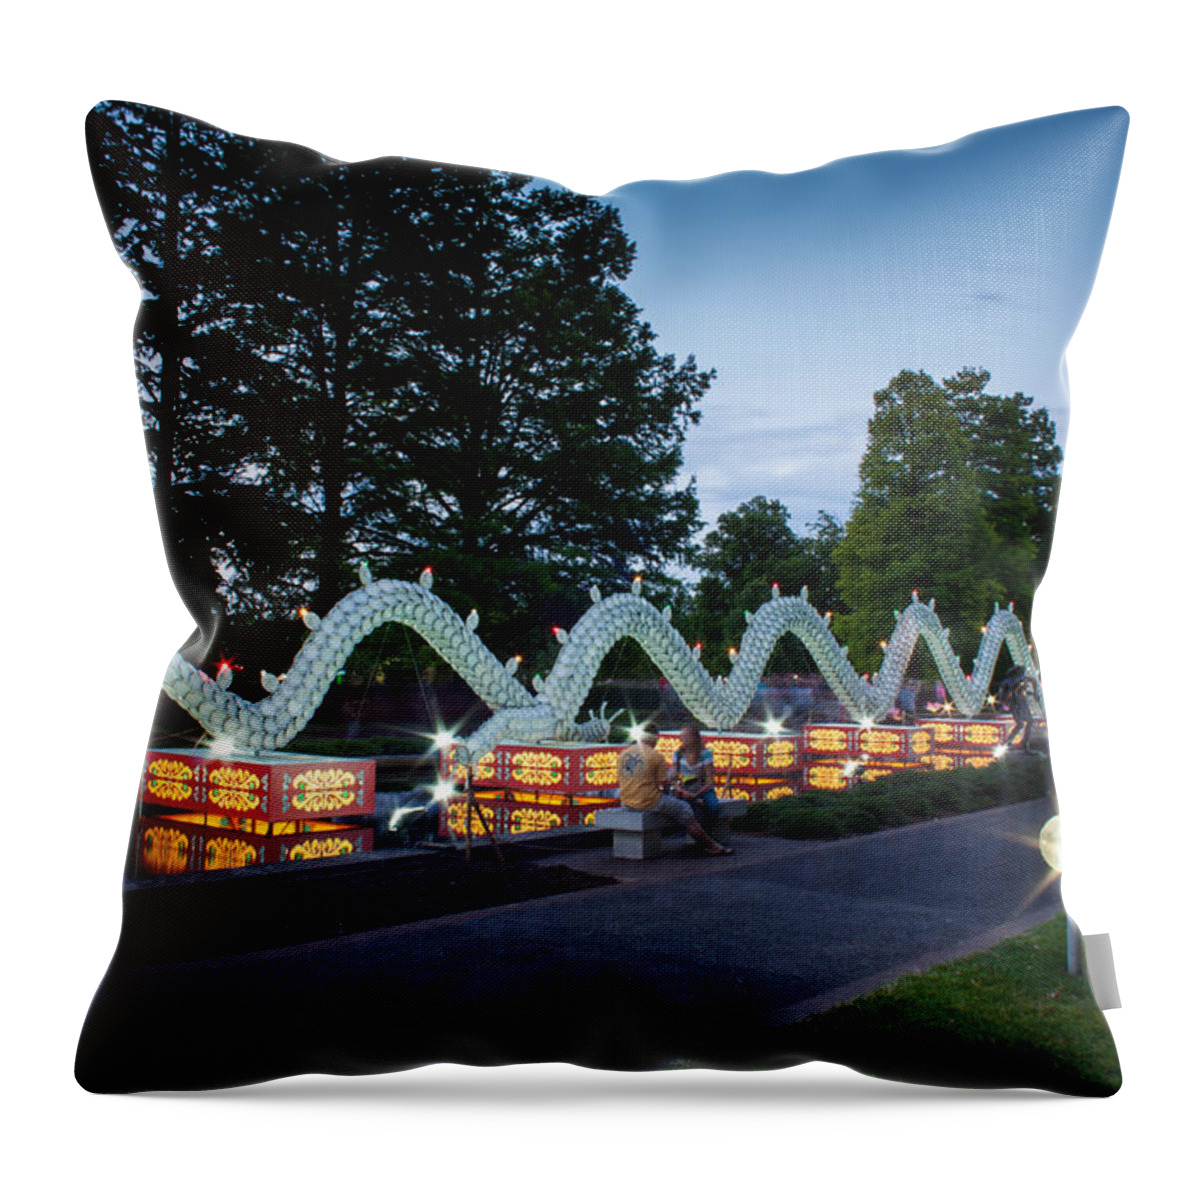 Art Throw Pillow featuring the photograph Porcelain Dragon #1 by Semmick Photo